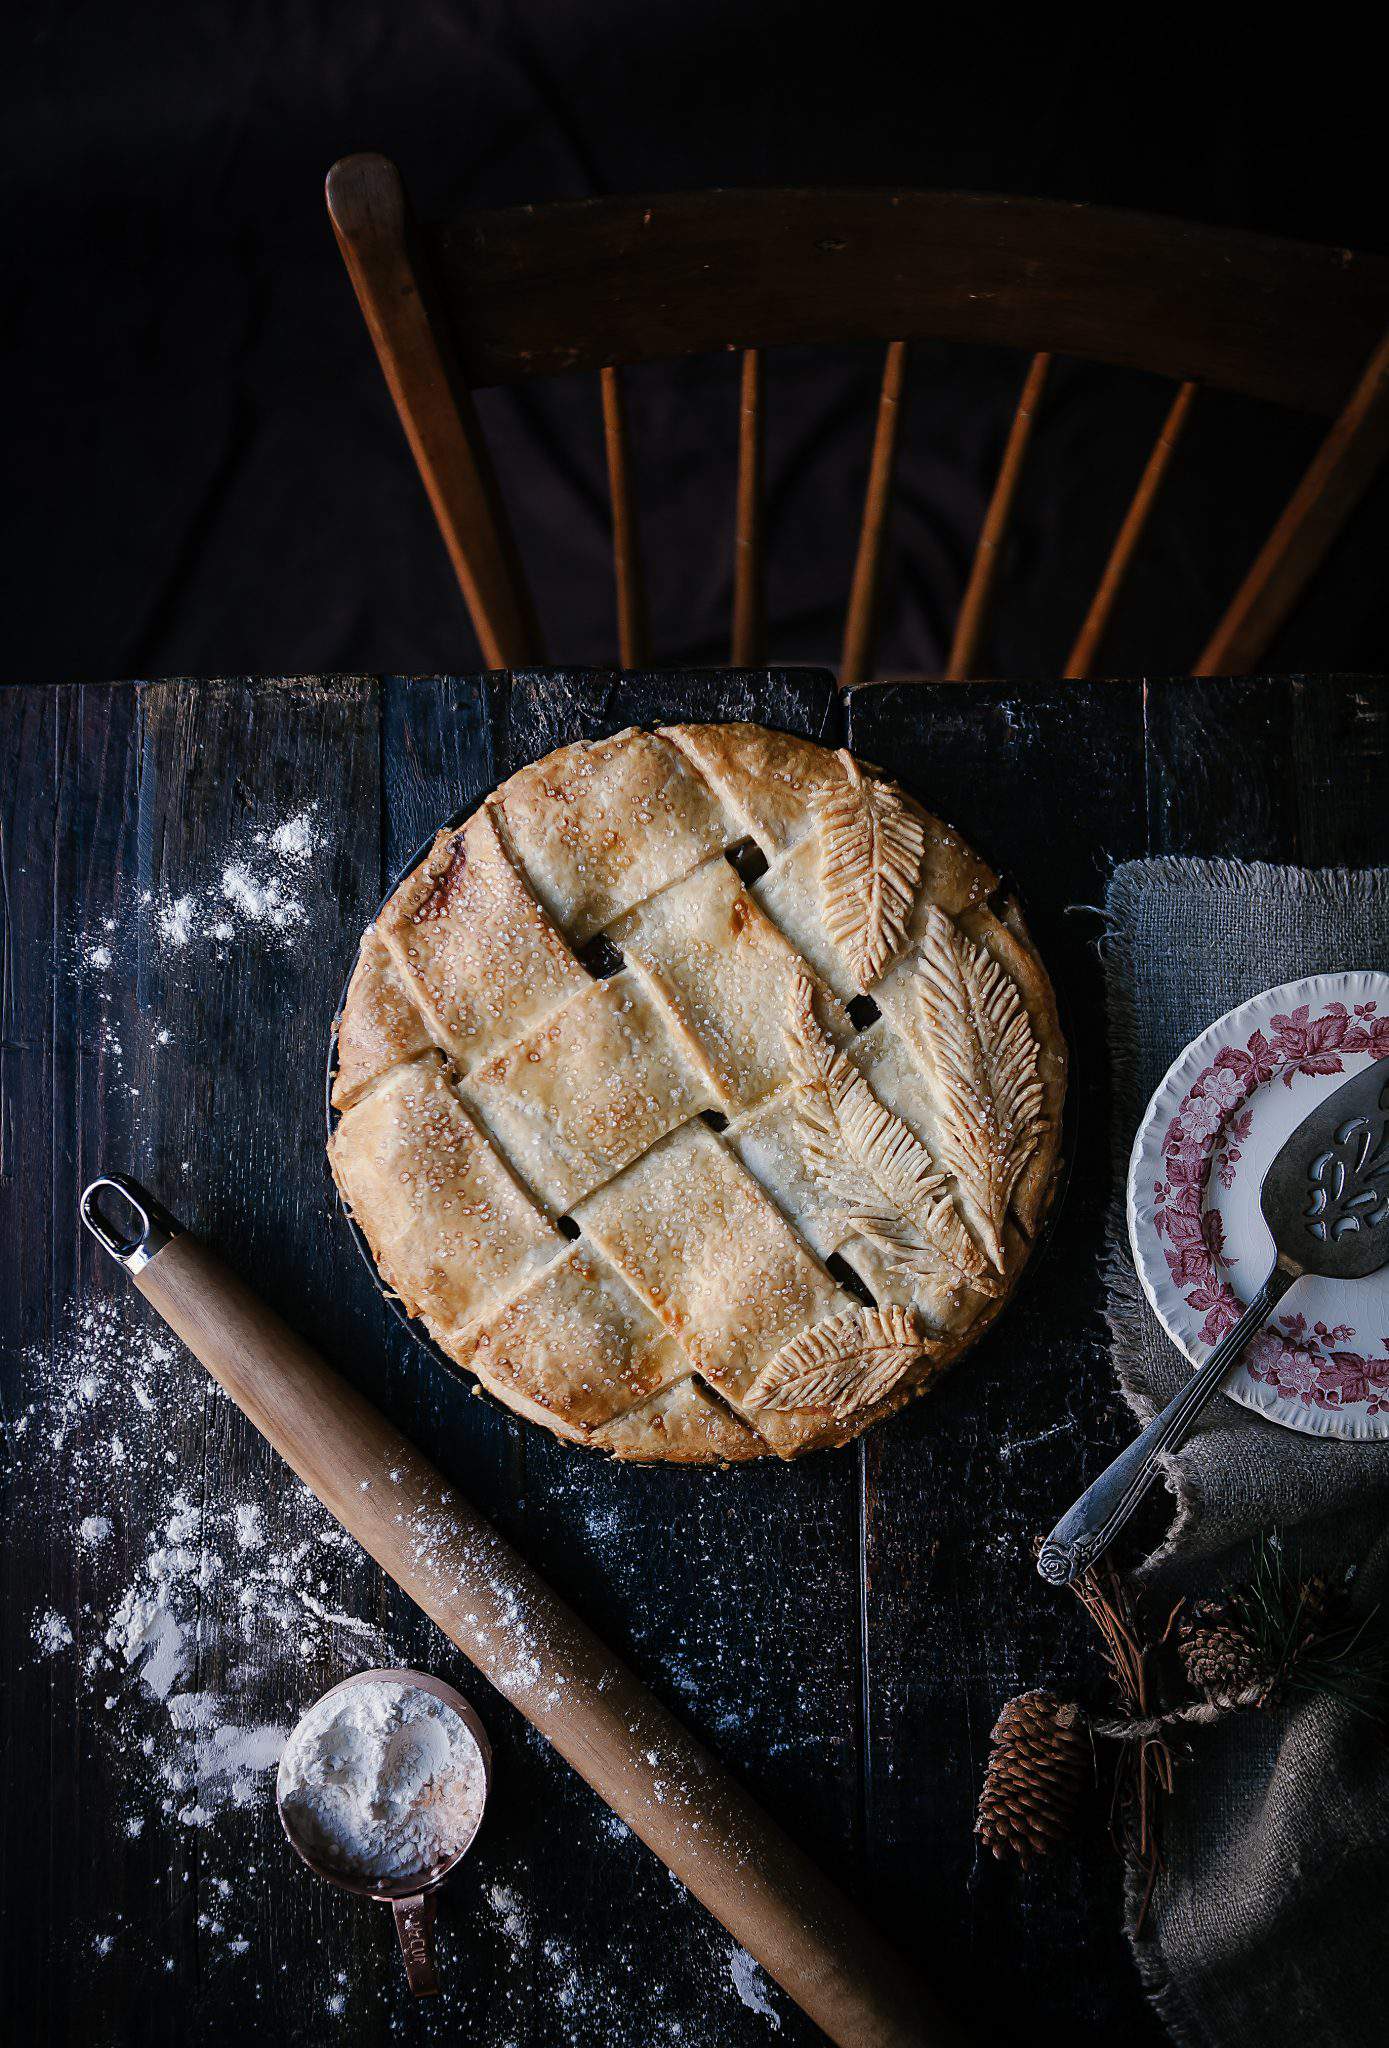 10 mouthwatering pies to try in November